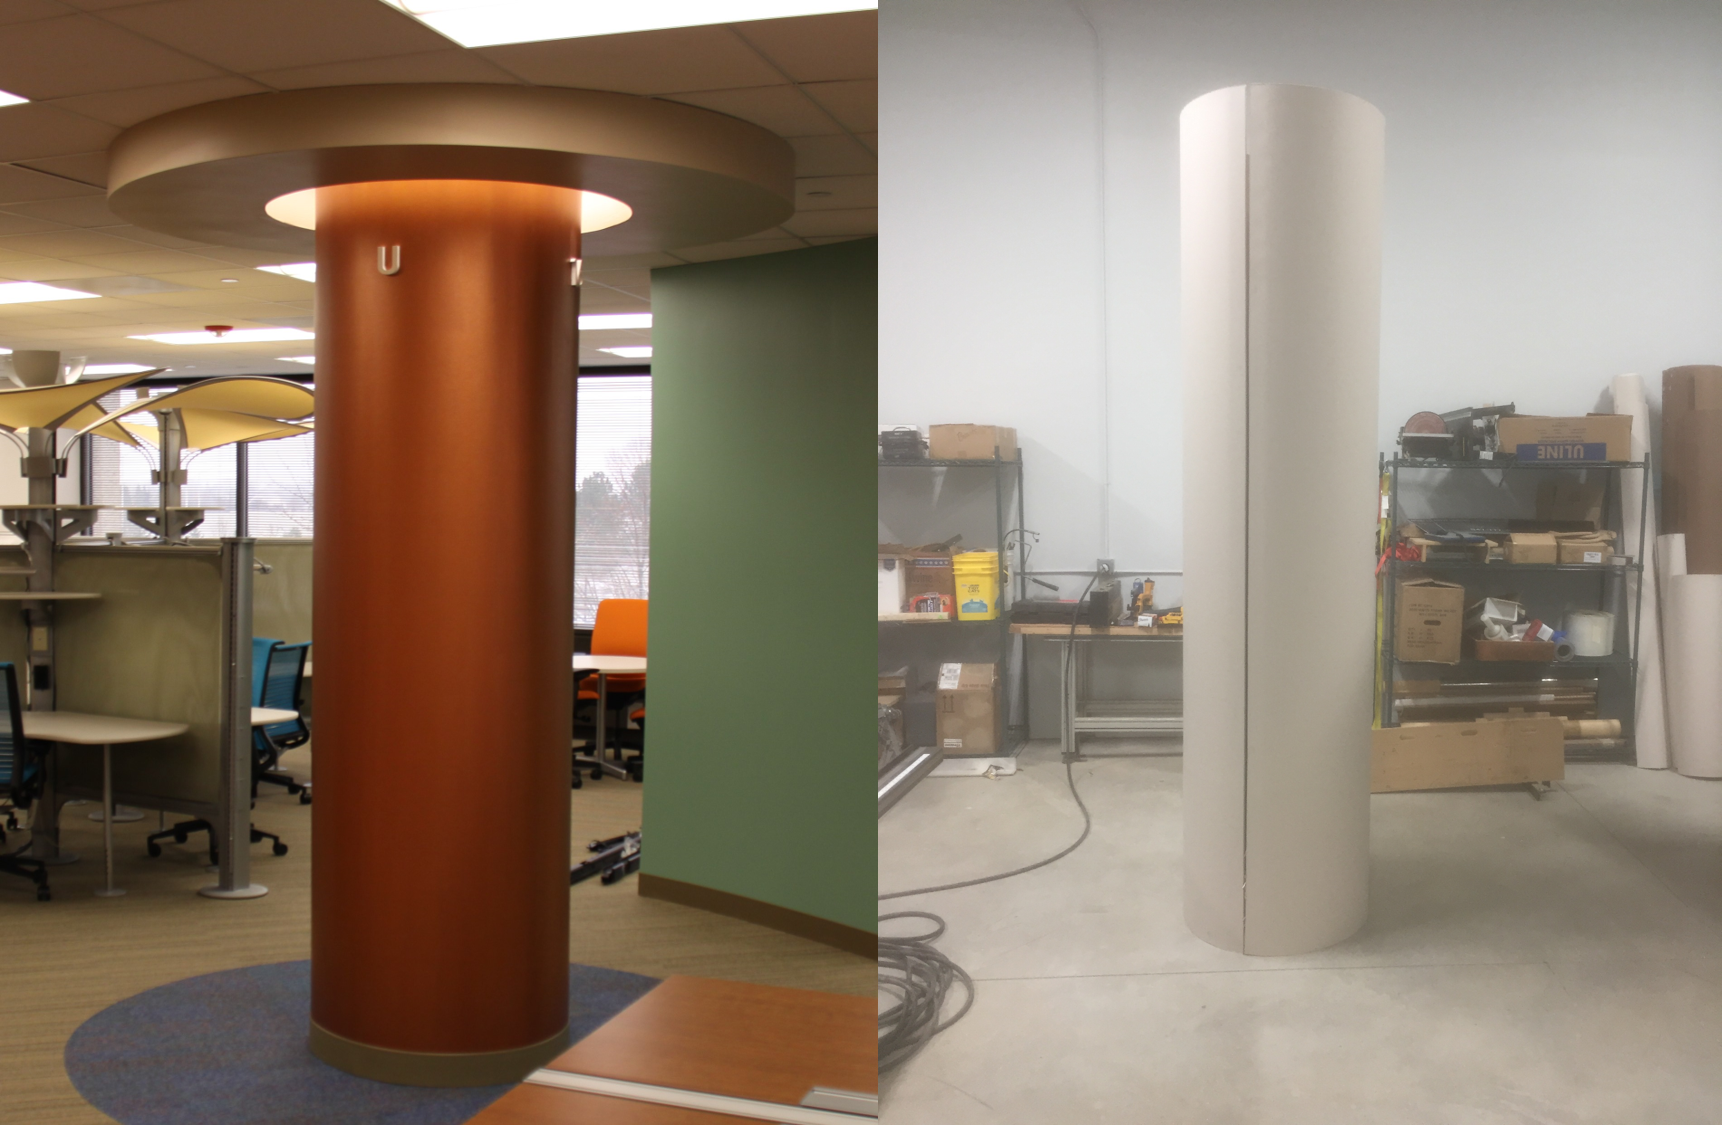 Can Pole-Wrap be used as a WALL COVERING?